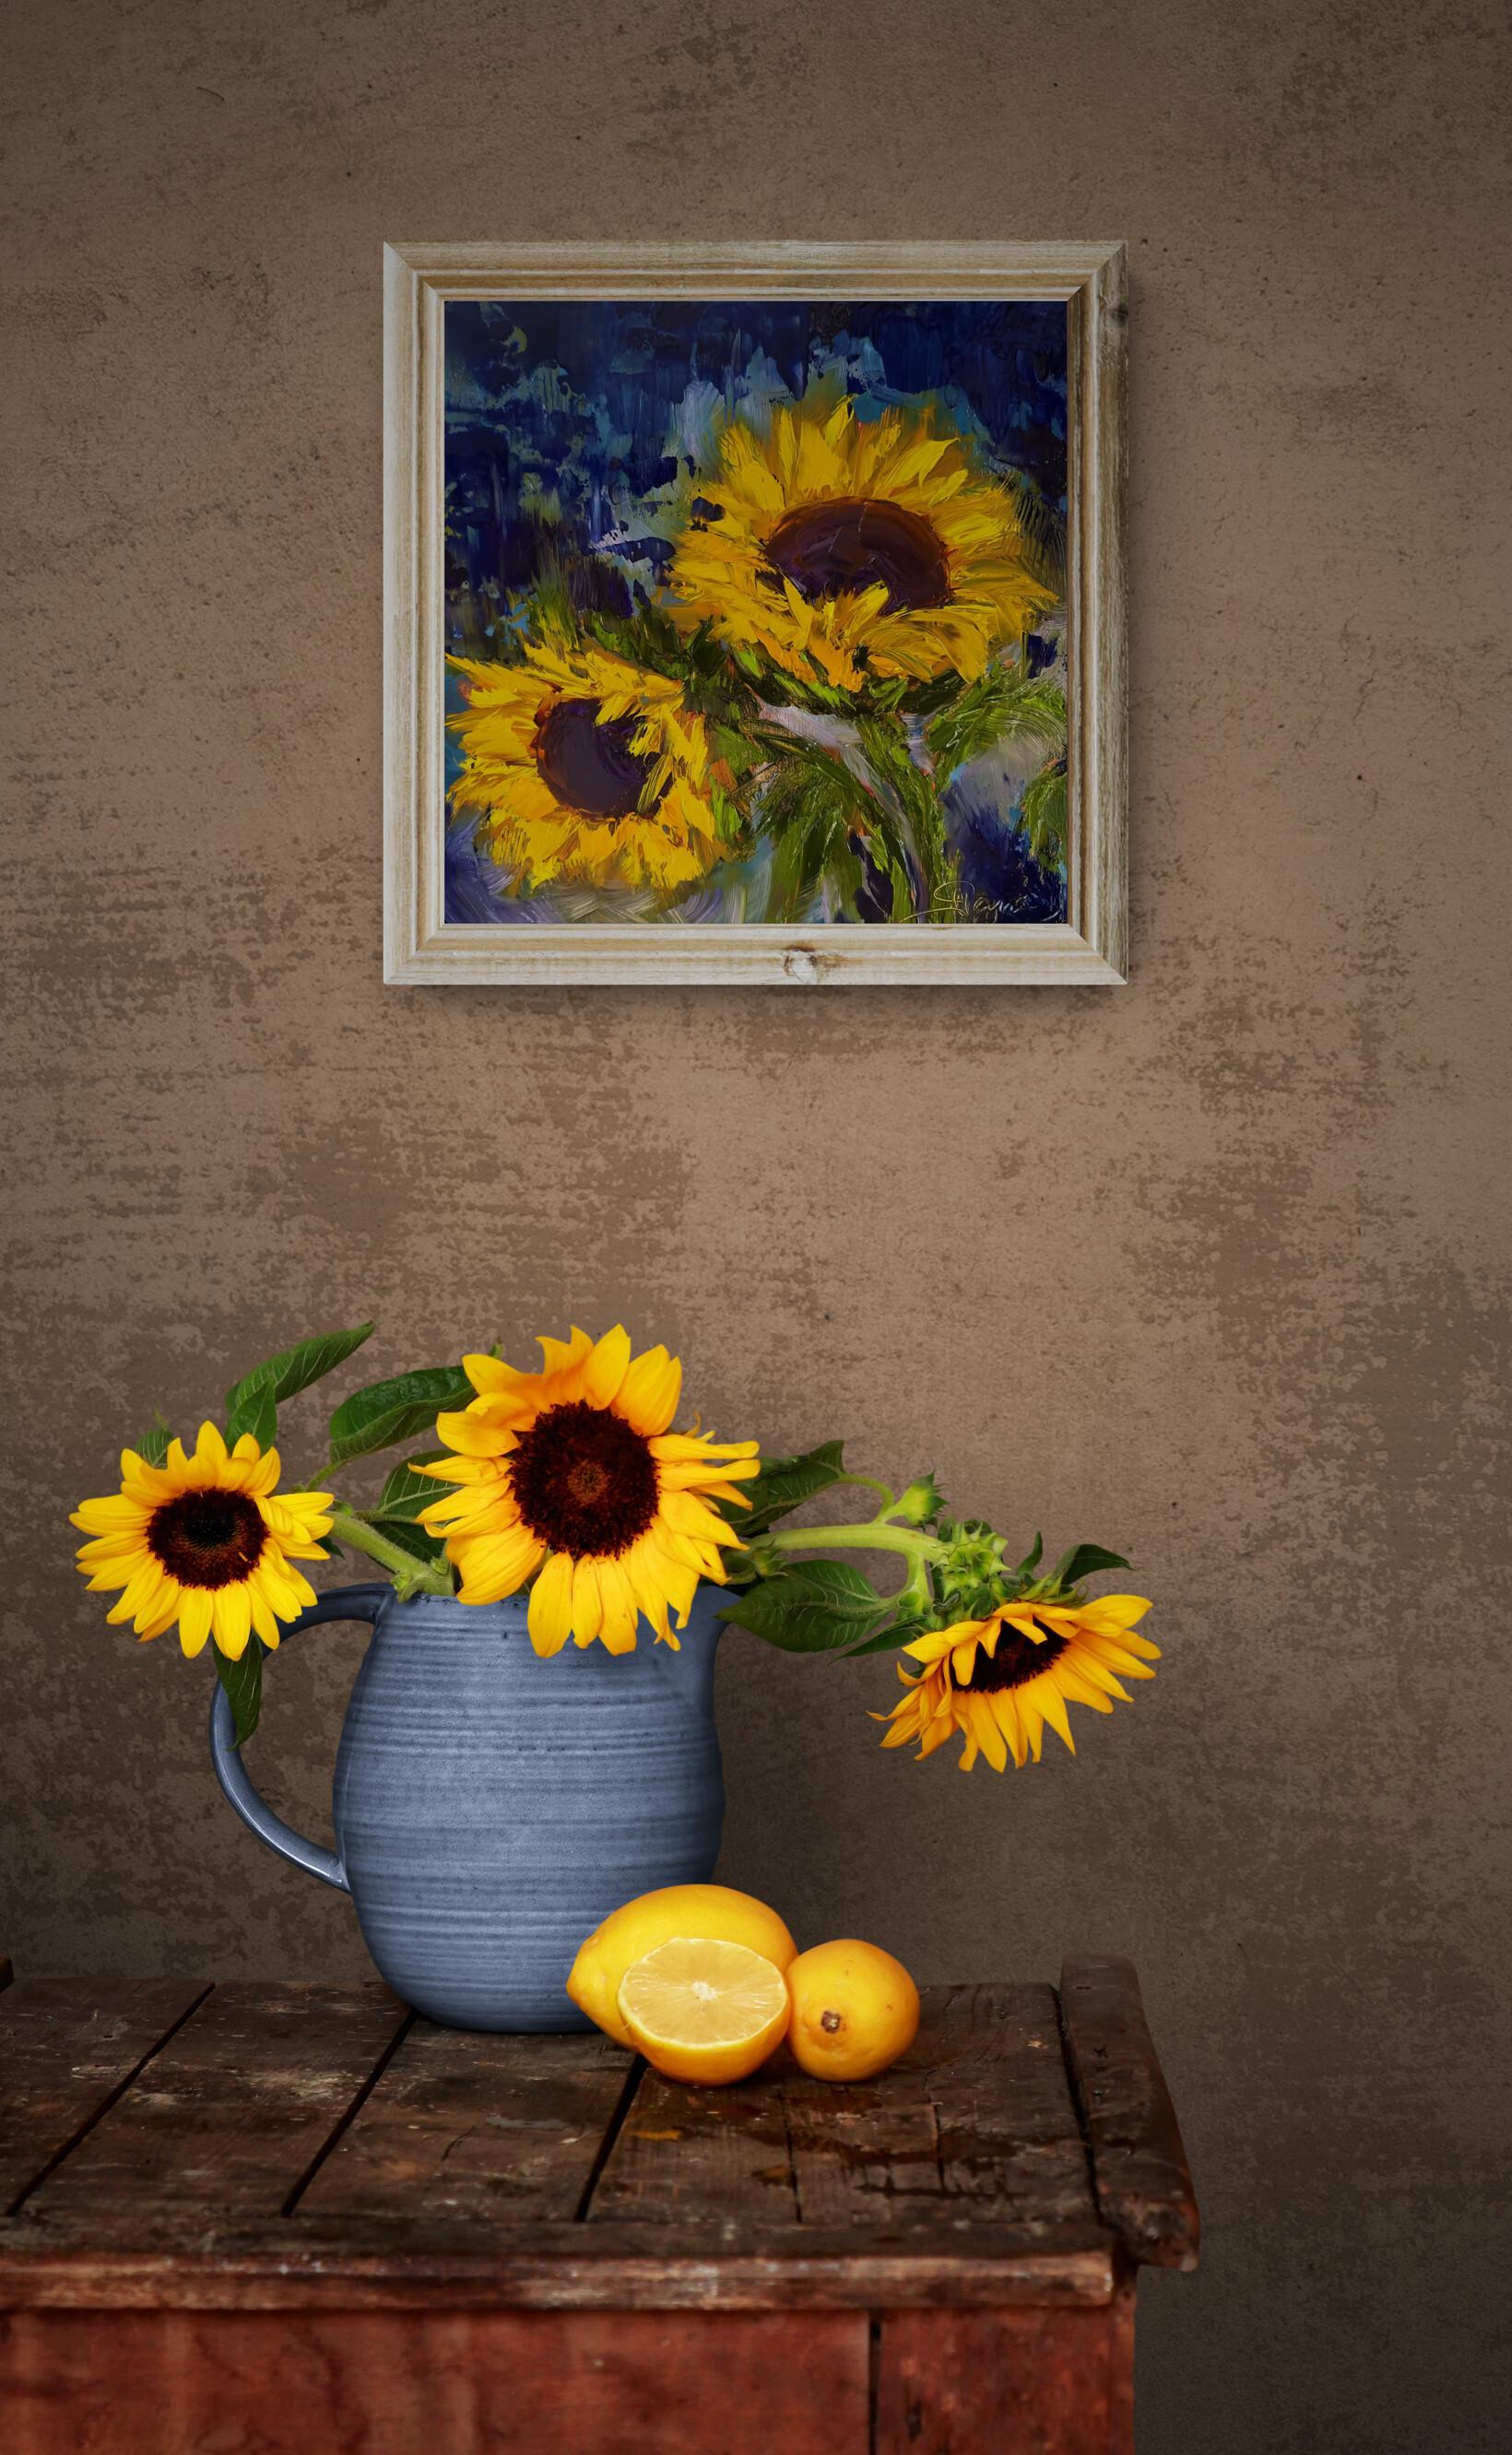 Genevieve Hamel
Sun, Sun, Sun
Oil on Wood Panel
Year: 2023
Size: 12x12x1.625in
Signed and inscribed by hand
COA provided
Ref.: 924802-1681

The heavy palette knife texture on these sunflower petals gives them the weight for a natural bend. Bright &